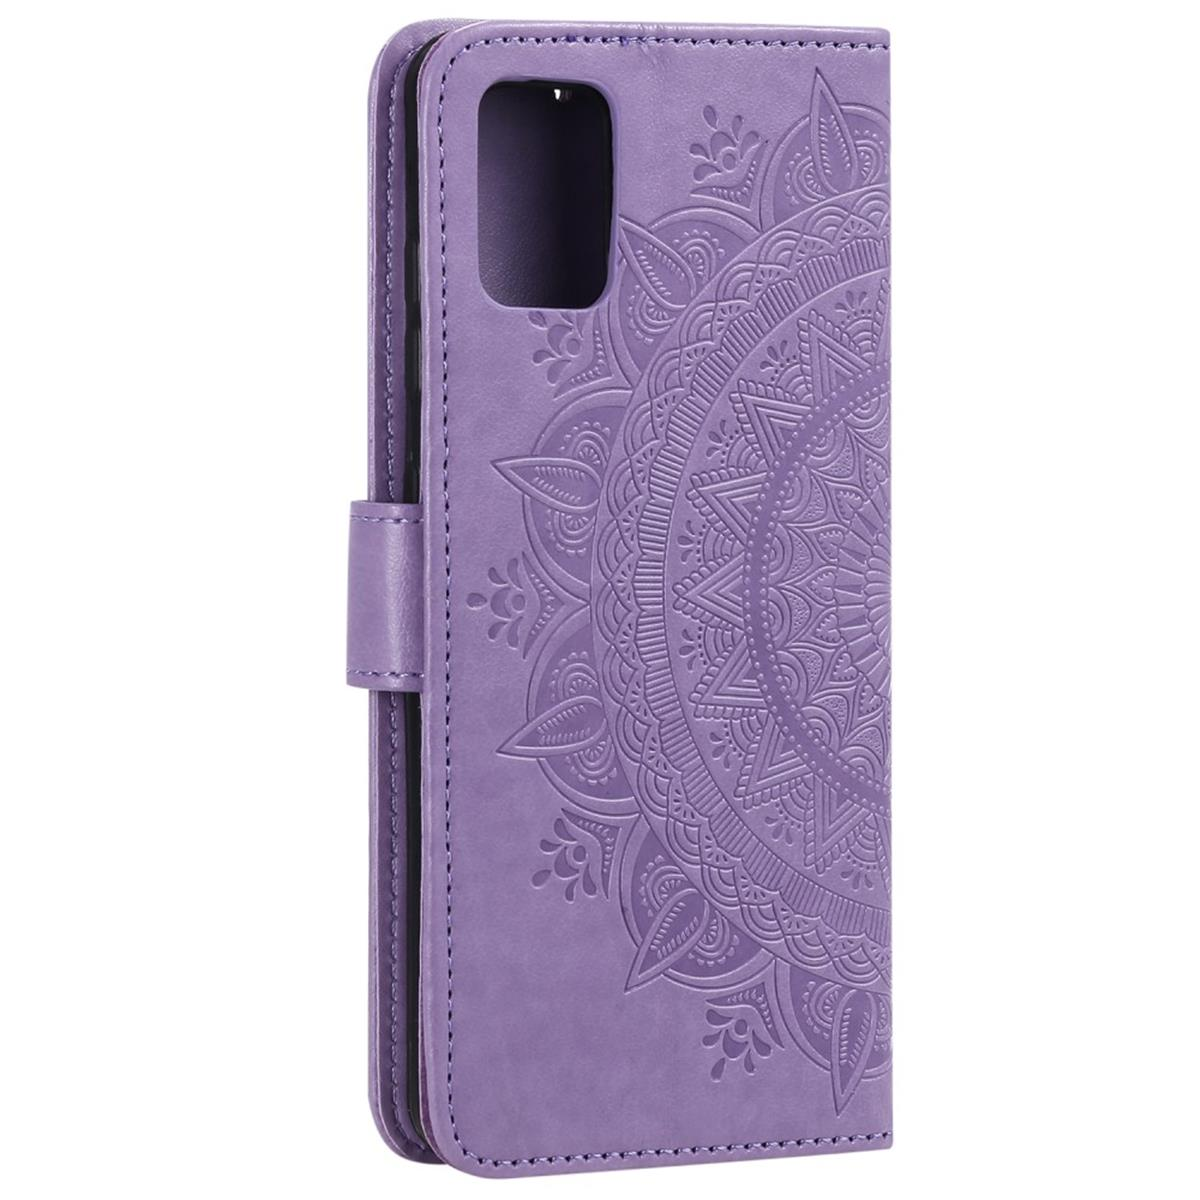 COVERKINGZ Mandala Galaxy Bookcover, A51, mit Lila Muster, Samsung, Klapphülle